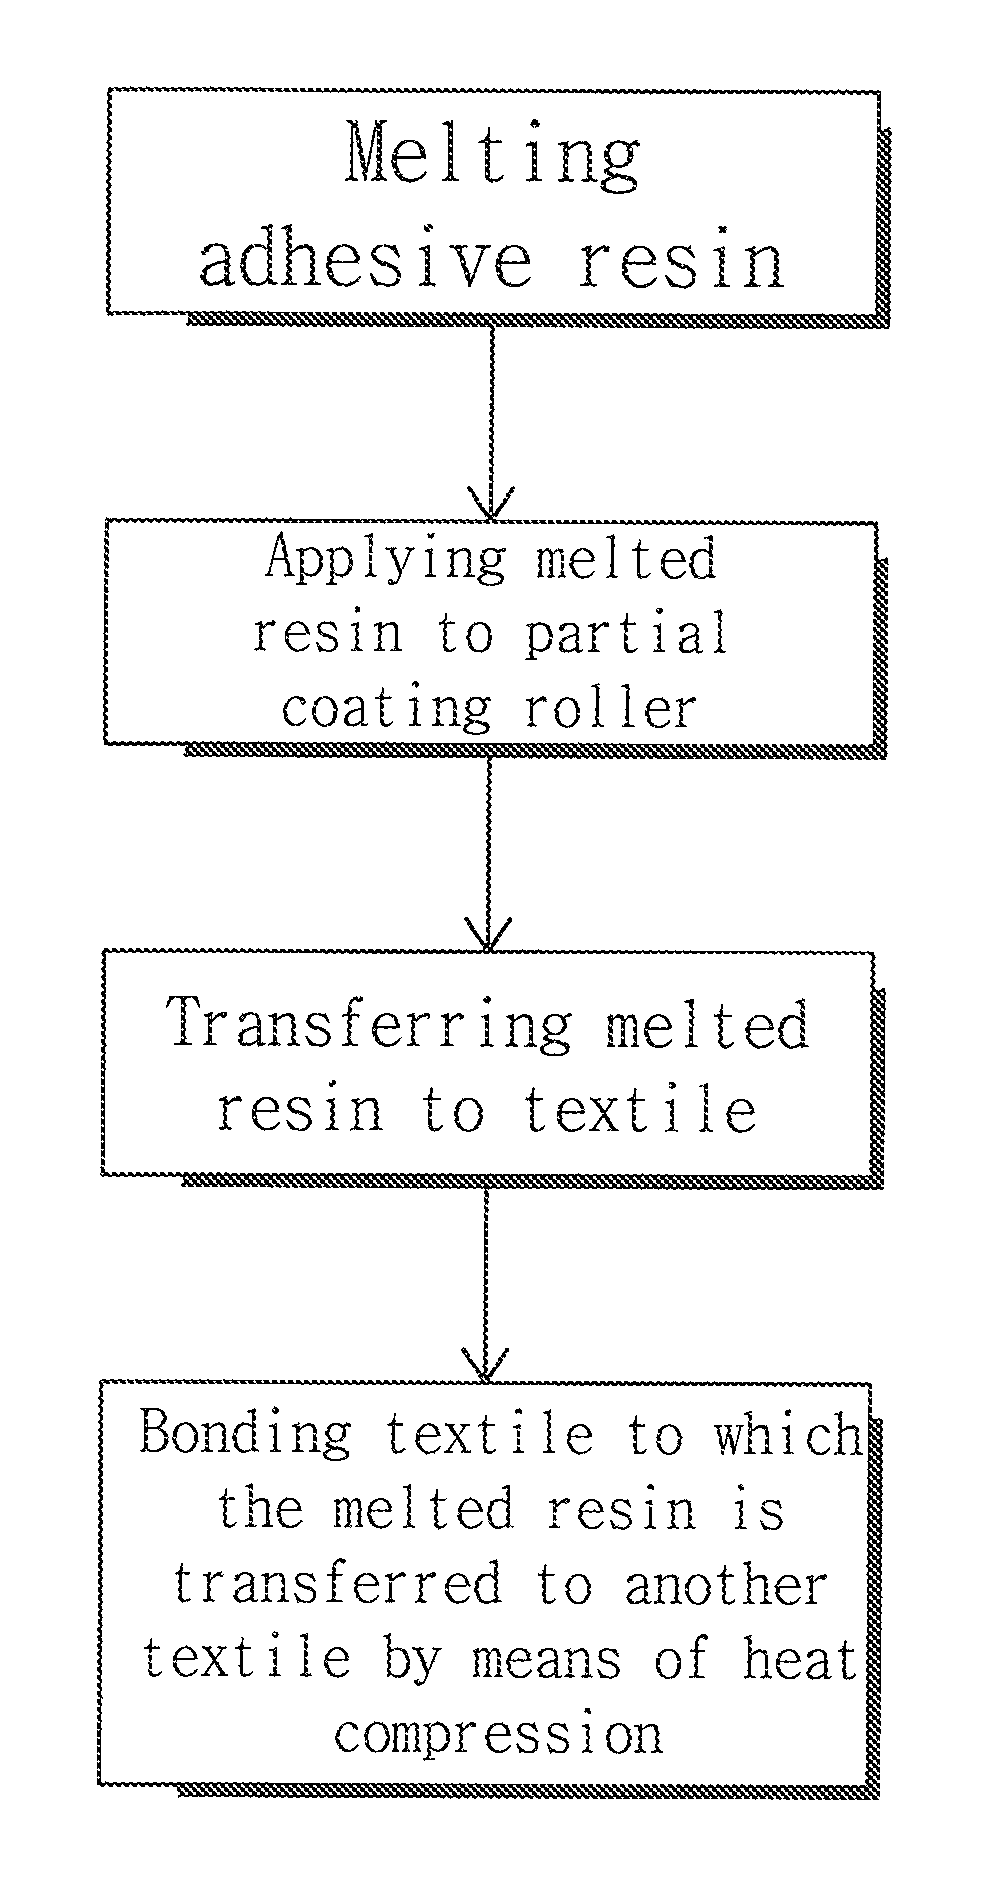 Method for bonding fabric or sheet-type industrial materials to each other